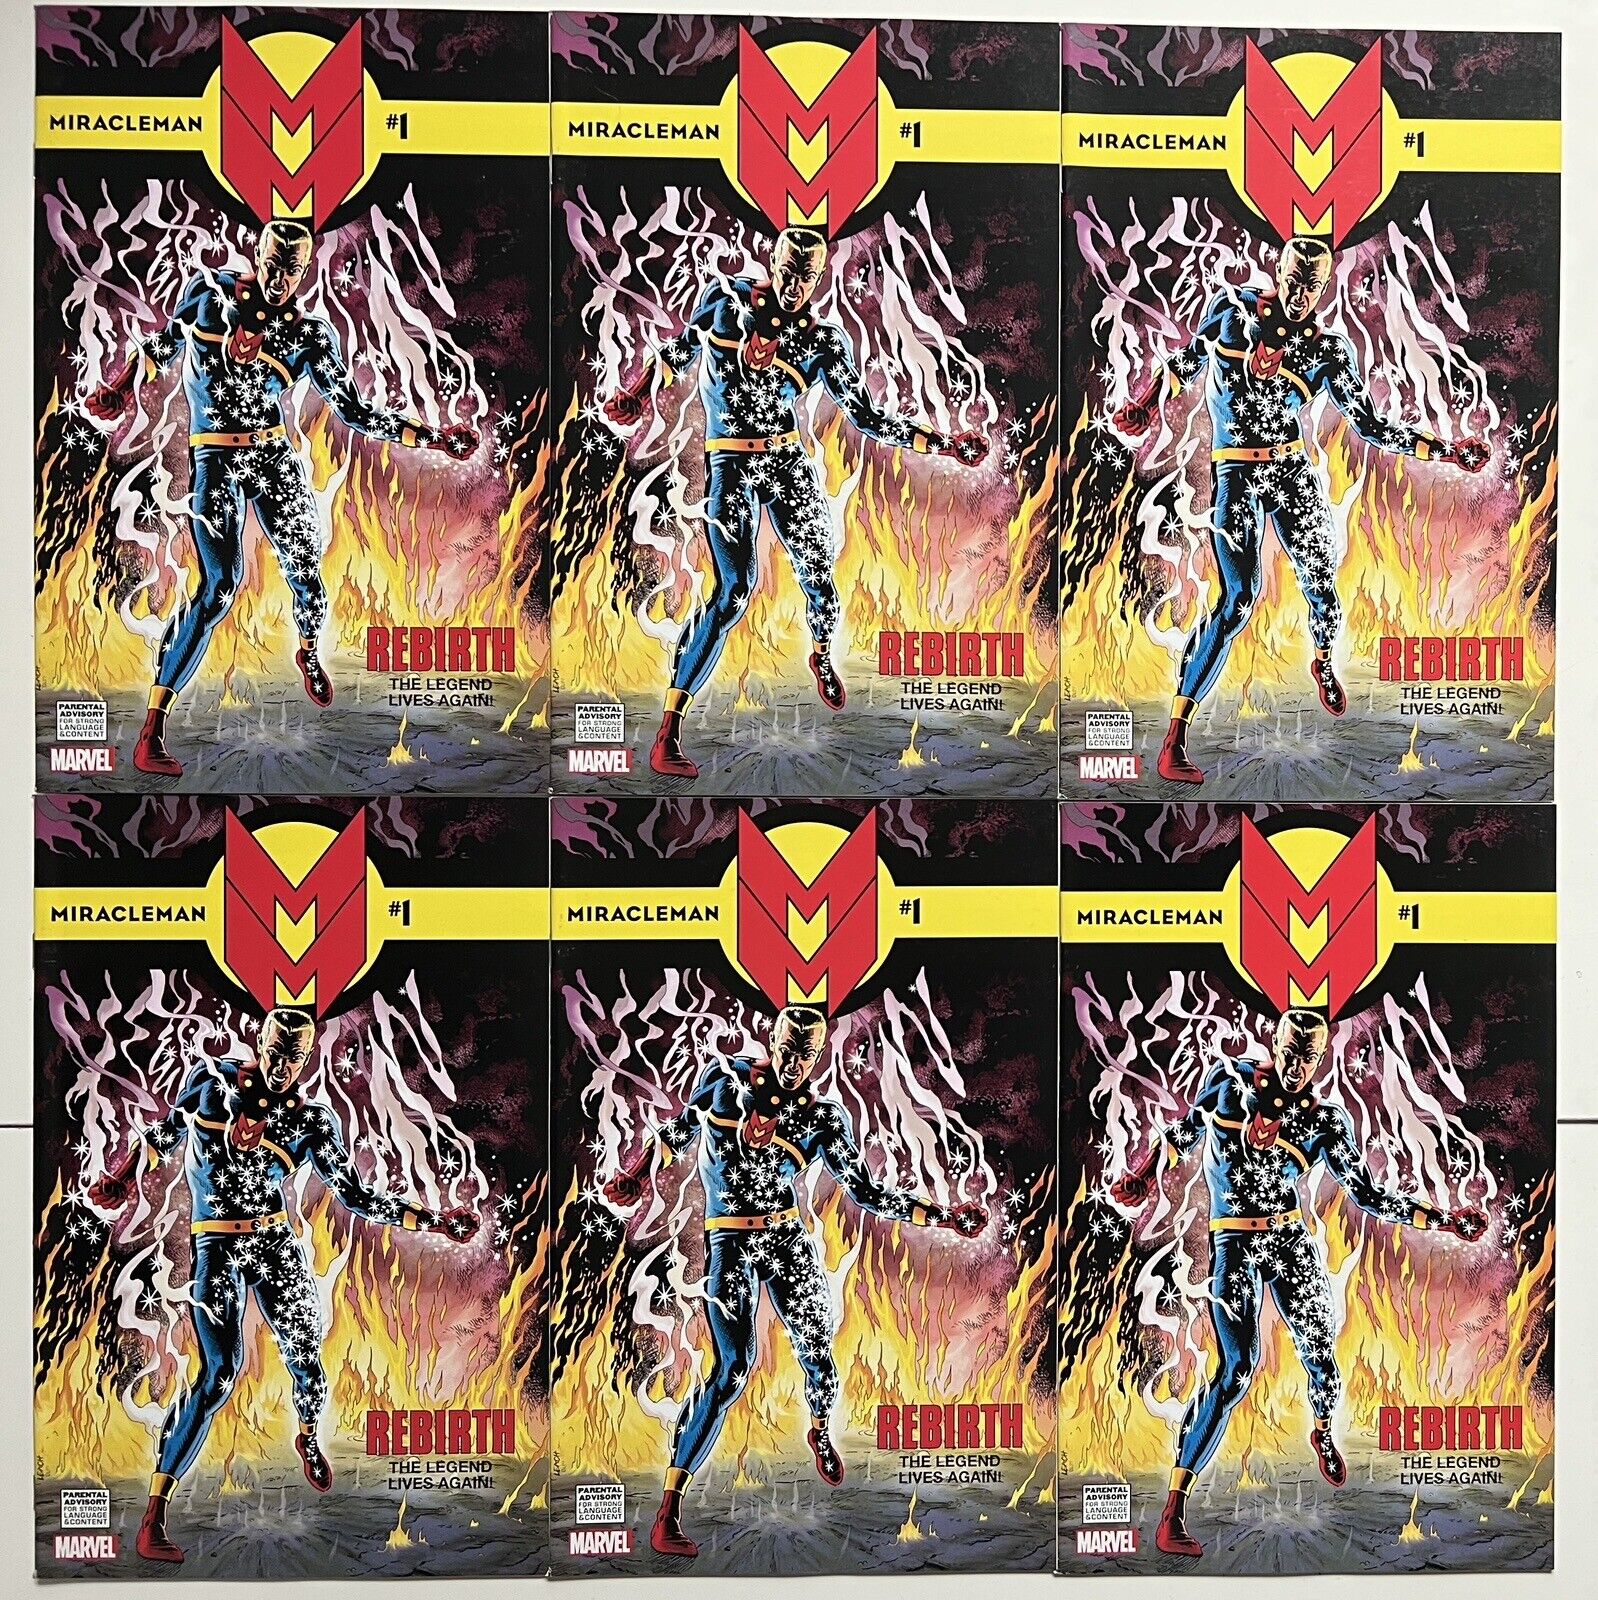 Lot of 6 Miracleman 1 Garry Leach Classic Variant Marvel Comics 2014 Alan Moore